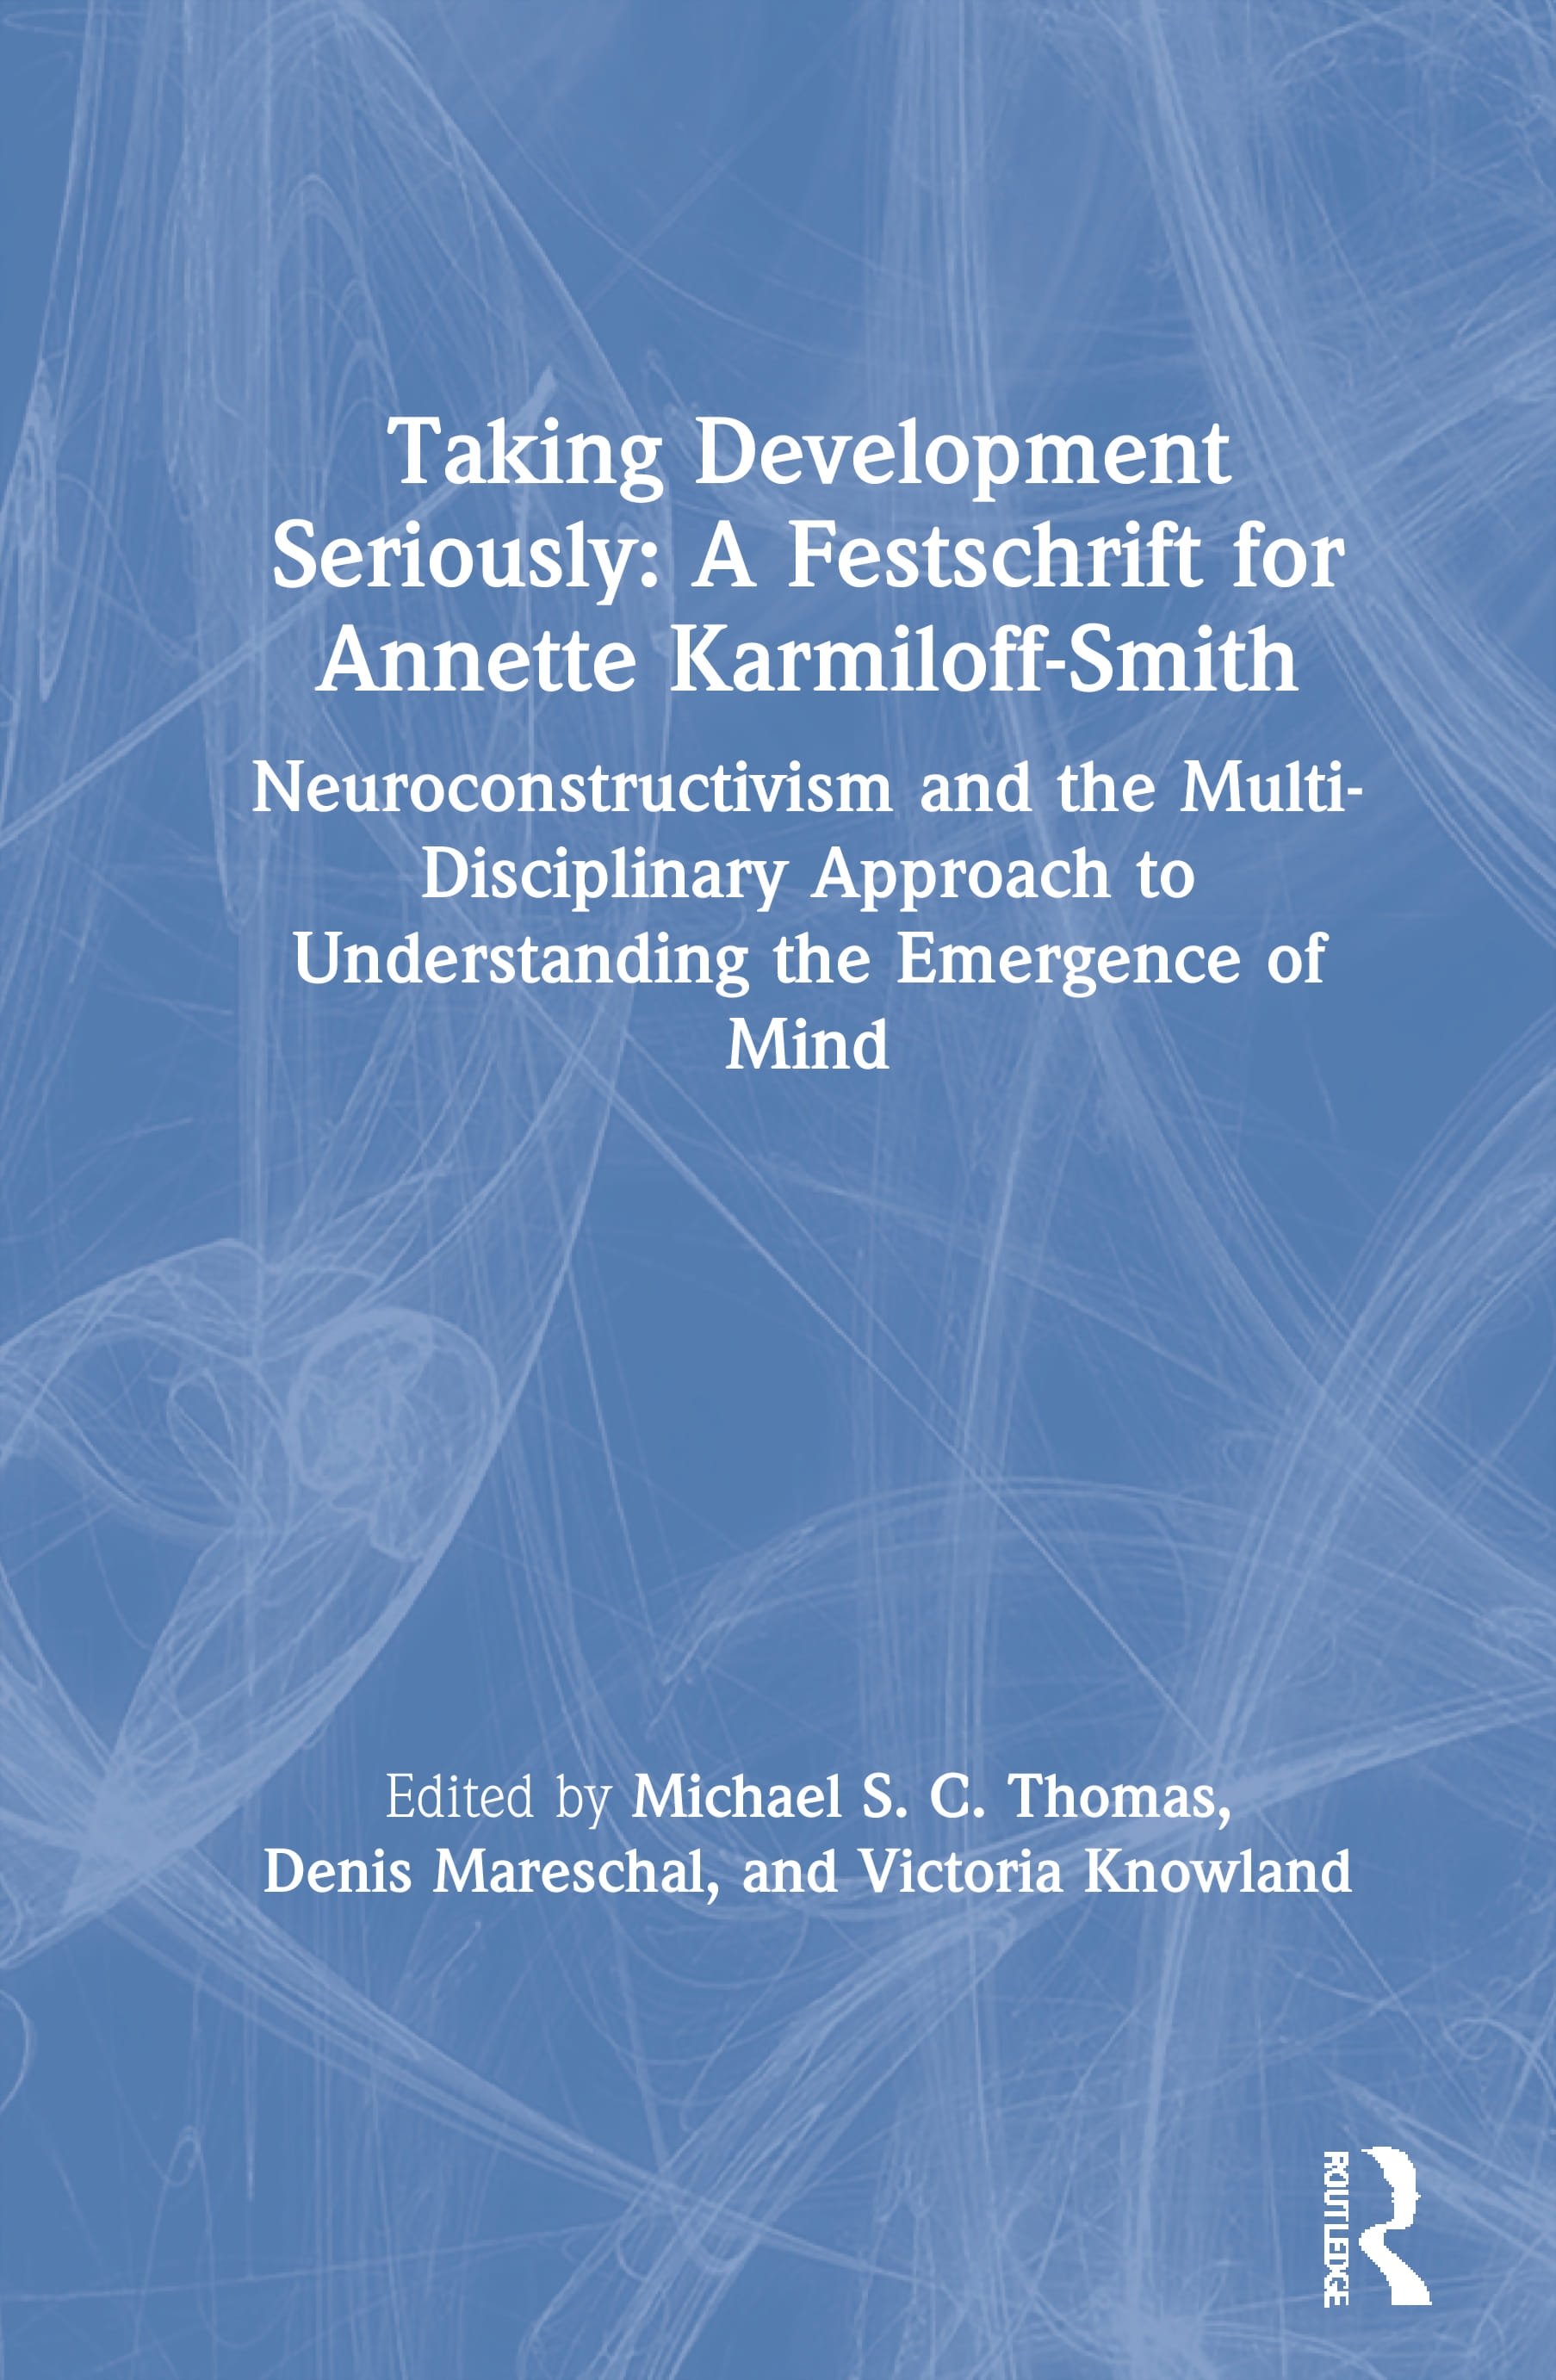 Taking Development Seriously a Festschrift for Annette Karmiloff-Smith: Neuroconstructivism and the Multi-Disciplinary Approach to Understanding the E